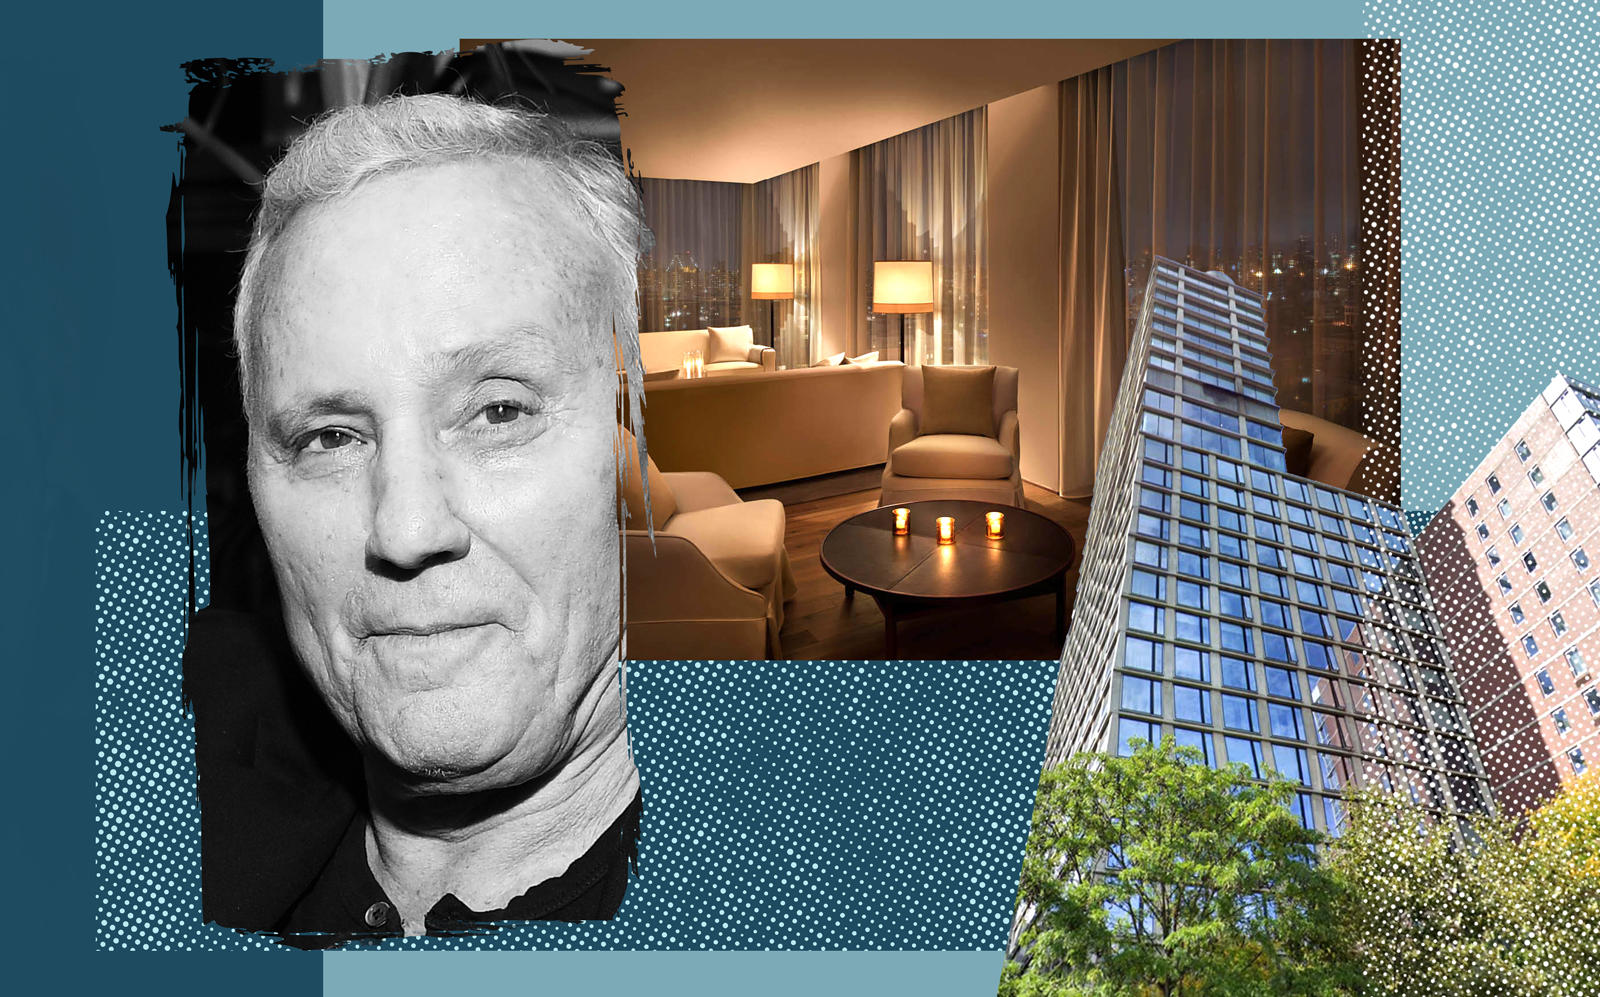 Ian Schrager and the Public Hotel at 215 Chrystie Street (Getty, Google Maps, Public Hotel)